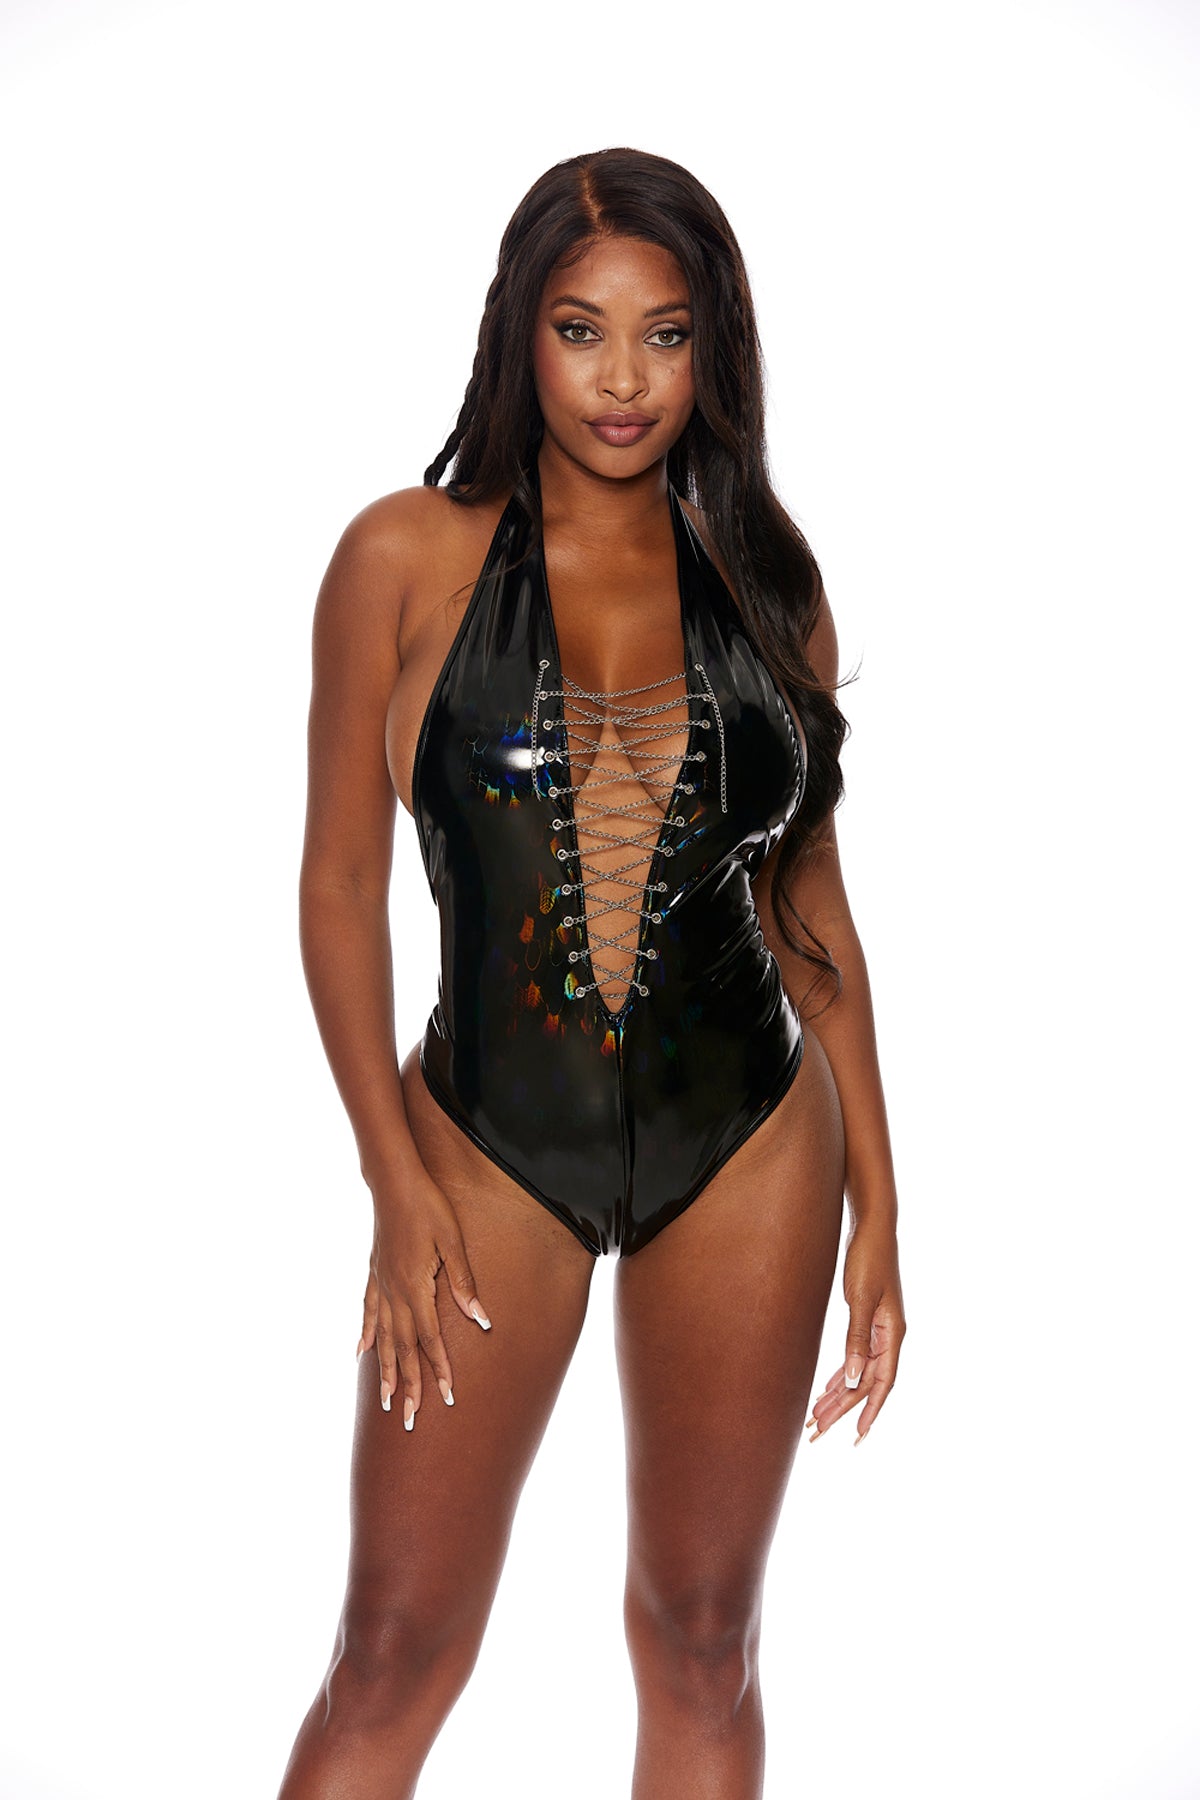 Feather Vinyl 1 Piece Bodysuit With Lace Up Chain. Shirley of Hollywood KOY by Bodyshotz K6157